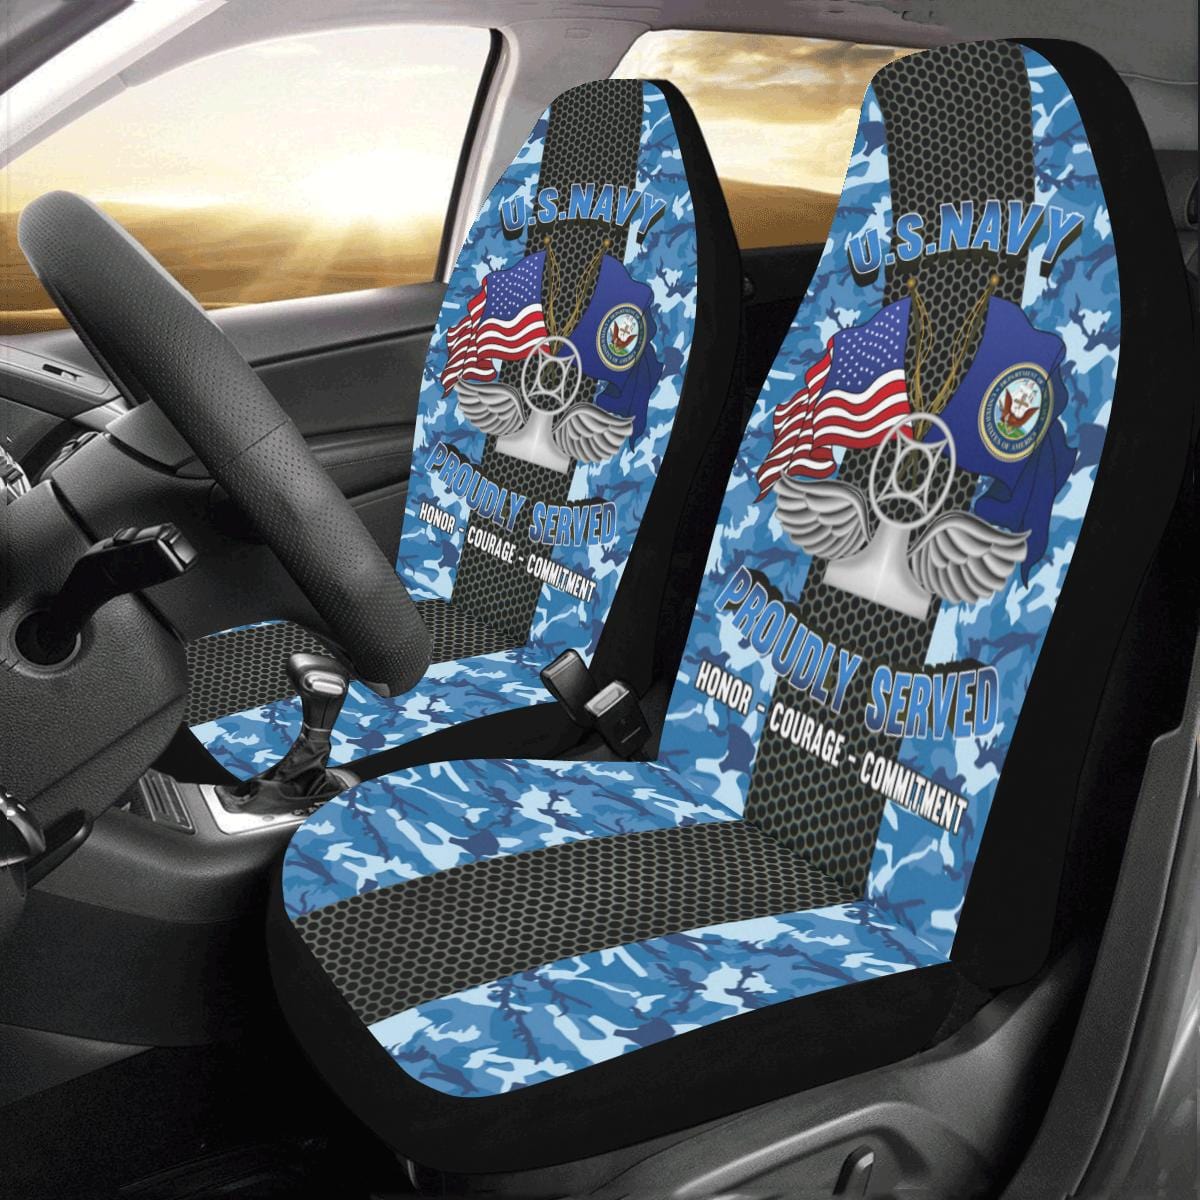 Navy Air Traffic Controller Navy AC Car Seat Covers (Set of 2)-SeatCovers-Navy-Rate-Veterans Nation